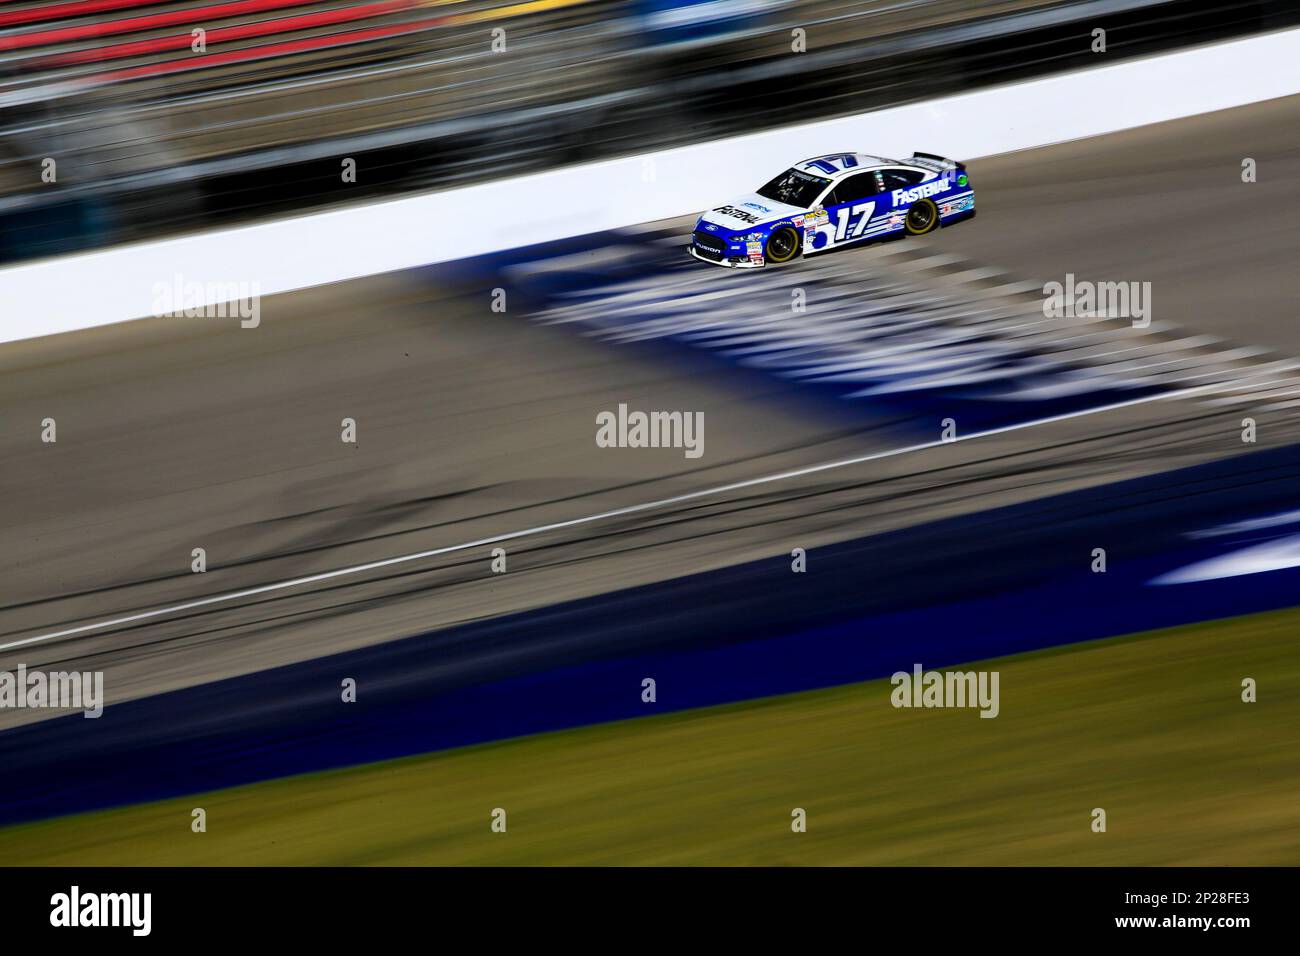 NASCAR driver Chris Buescher is shown during testing at Michigan International Speedway in Brooklyn, Mich., Tuesday, Oct